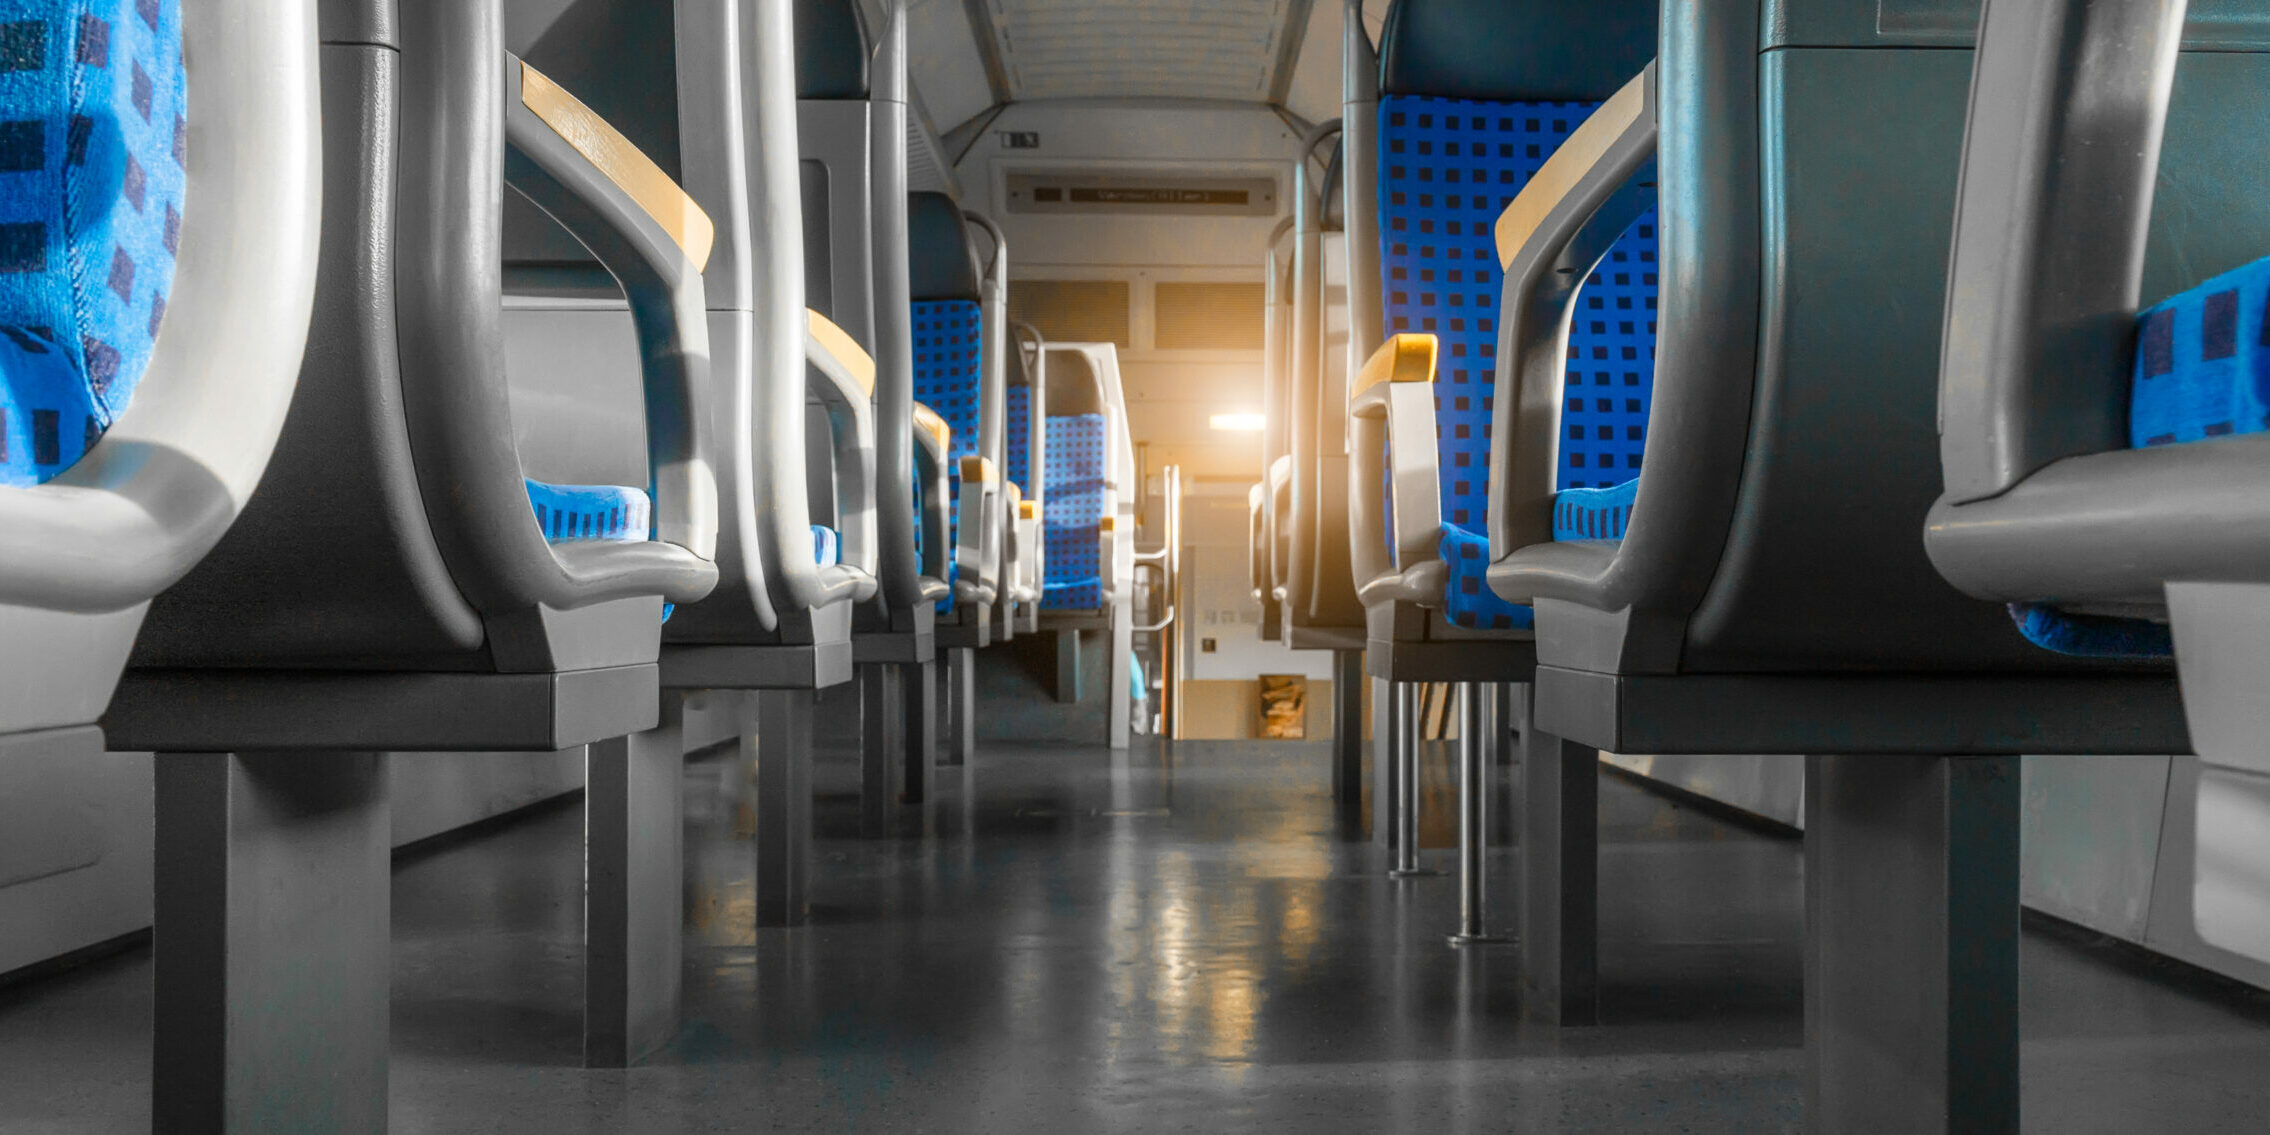 Clean hygiene empty seat on europe Germany public transportation train subway bus with sunlight for traveler to travel during vacation with nature view on window